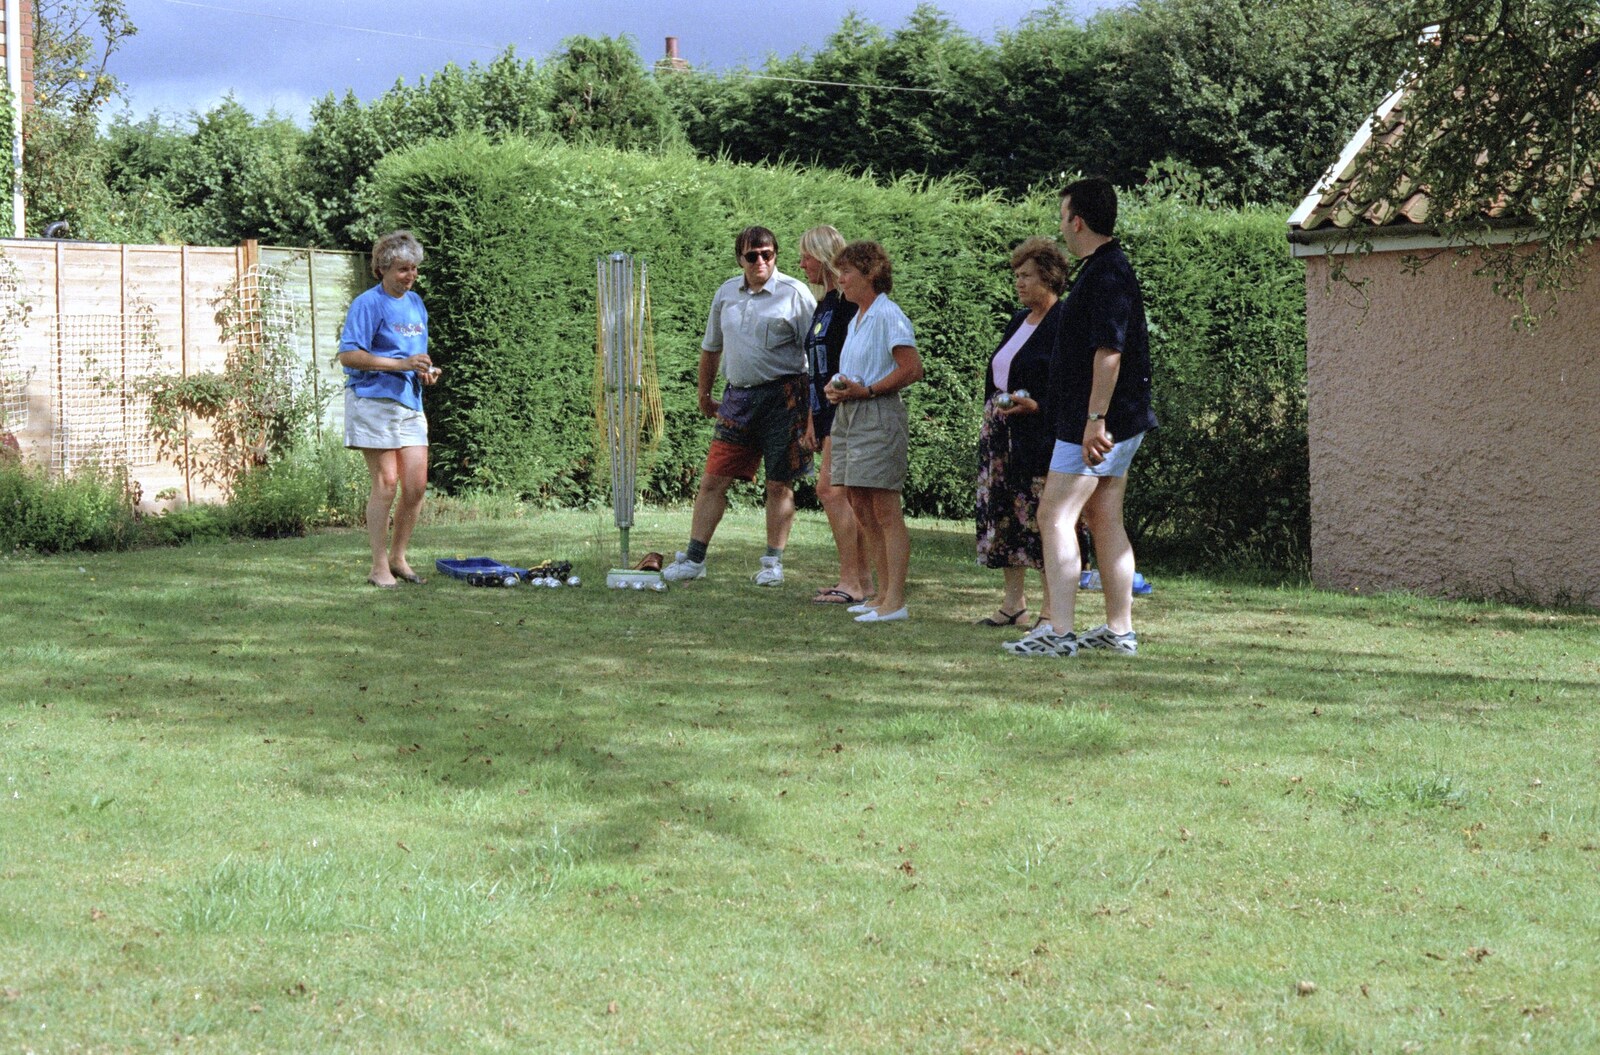 More petanque milling around from "Mad" Sue's 50th and the Building of the Stuston Bypass, Stuston, Suffolk - 7th July 1994